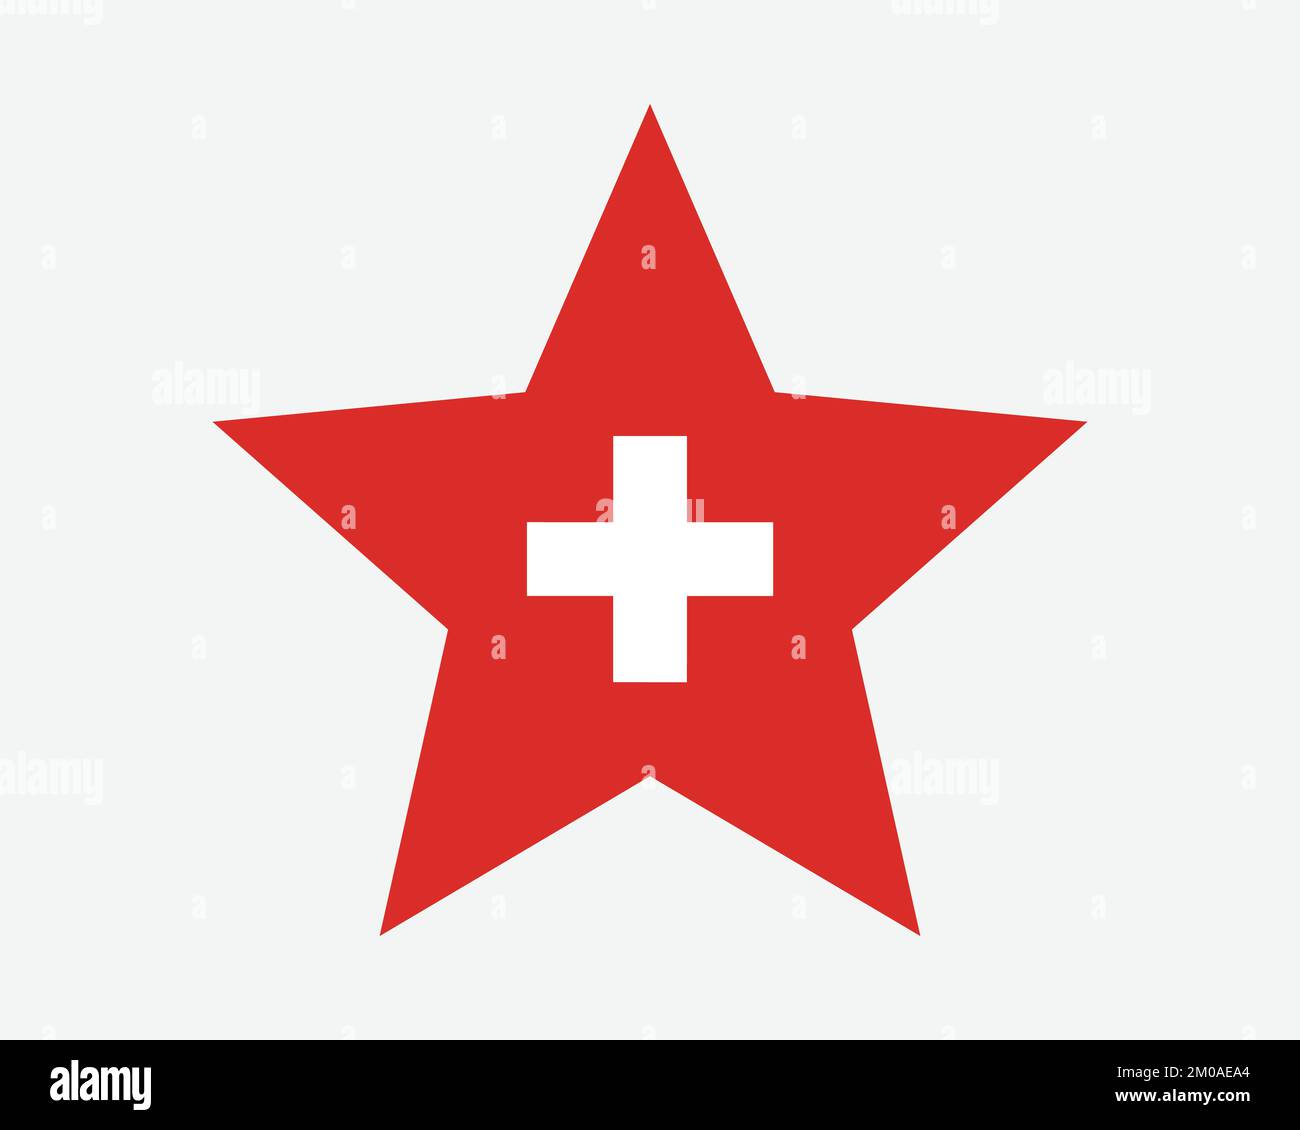 Switzerland Star Flag. Swiss Confederation Star Shape Flag. Country National Banner Icon Symbol Vector Flat Artwork Graphic Illustration Stock Vector